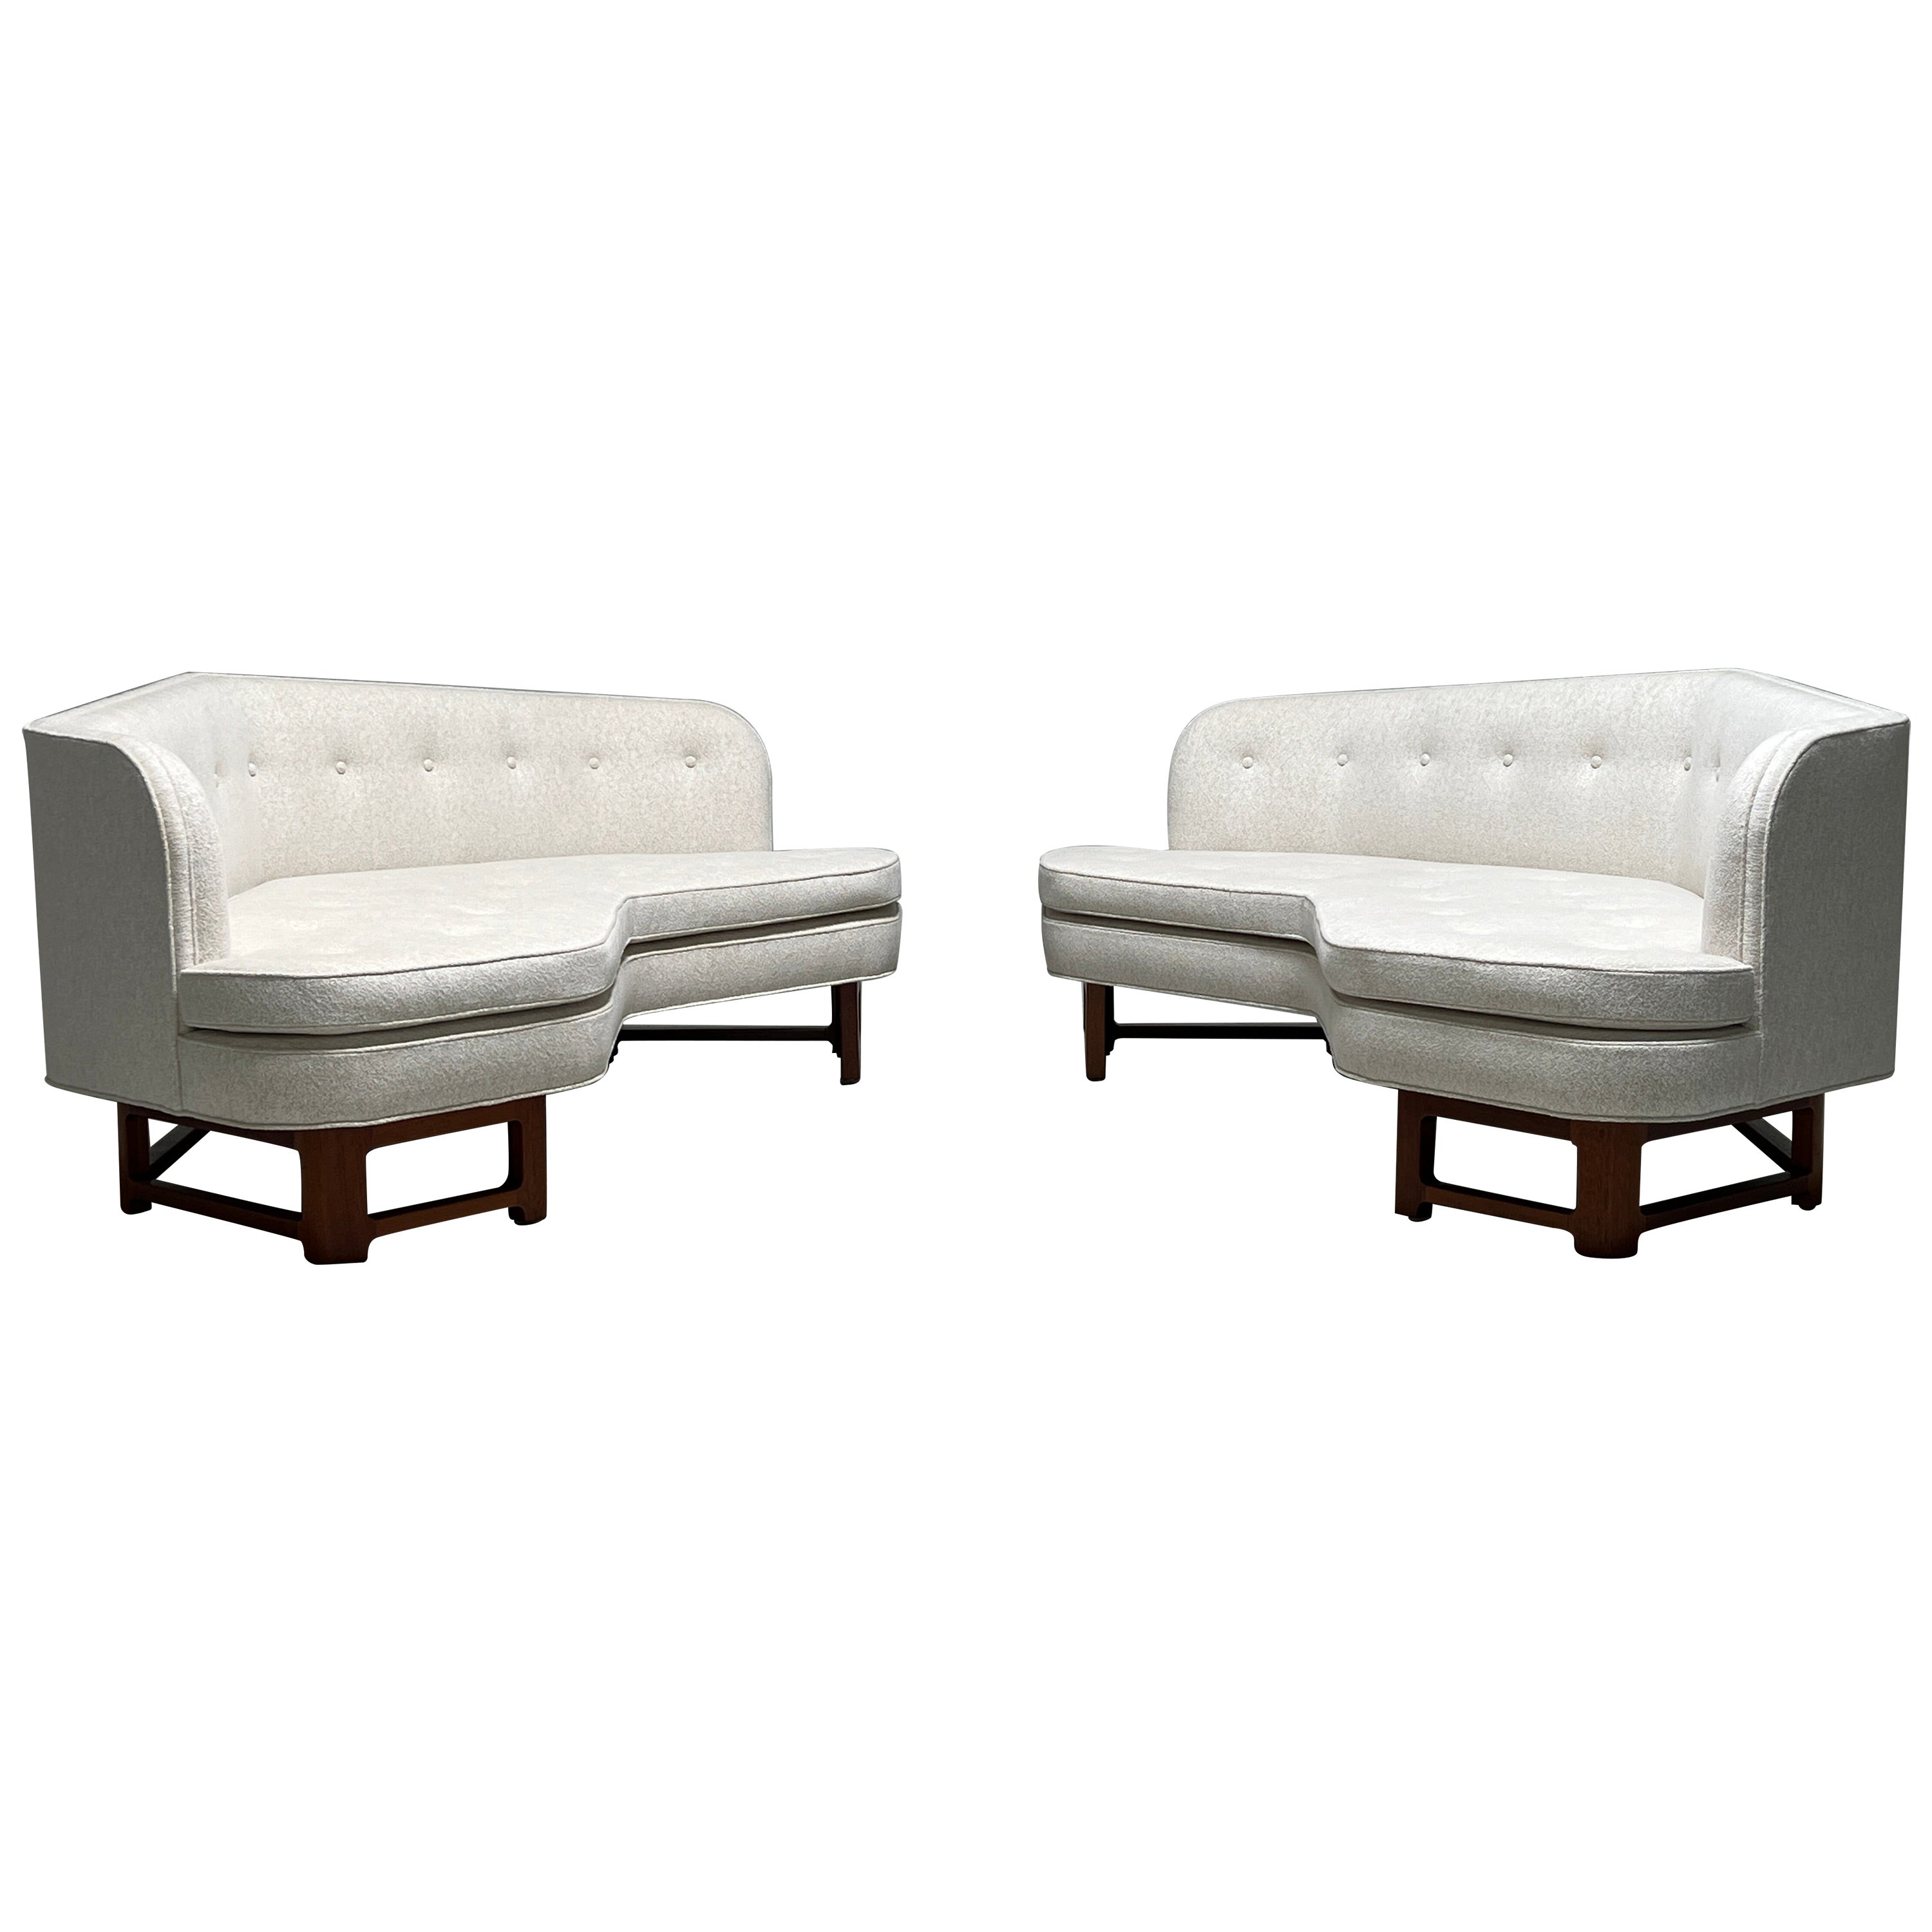 Pair of Angled Sofas by Edward Wormley for Dunbar